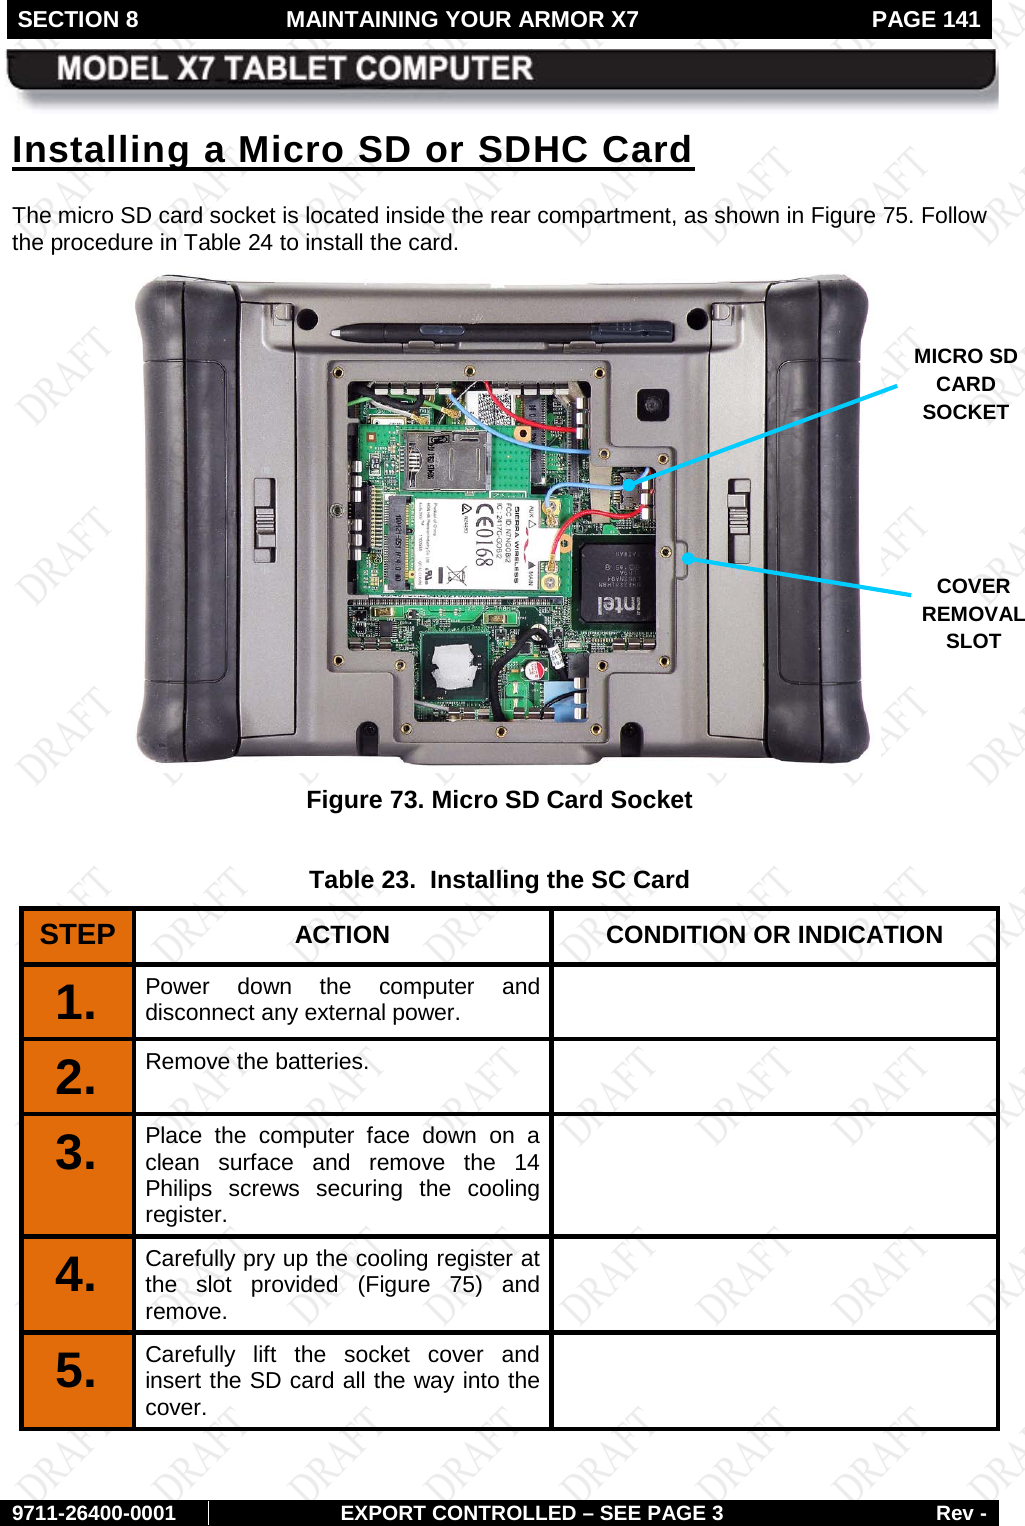 SECTION 8 MAINTAINING YOUR ARMOR X7  PAGE 141        9711-26400-0001 EXPORT CONTROLLED – SEE PAGE 3 Rev - Installing a Micro SD or SDHC Card The micro SD card socket is located inside the rear compartment, as shown in Figure 75. Follow the procedure in Table 24 to install the card.  Figure 73. Micro SD Card Socket  Table 23.  Installing the SC Card STEP  ACTION CONDITION OR INDICATION 1.  Power down the computer and disconnect any external power.  2.  Remove the batteries.   3.  Place the computer face down on a clean surface and remove the 14 Philips screws securing the cooling register.  4.   Carefully pry up the cooling register at the slot provided (Figure  75) and remove.  5.  Carefully lift the socket cover and insert the SD card all the way into the cover.  MICRO SD CARD SOCKET COVER REMOVAL SLOT 